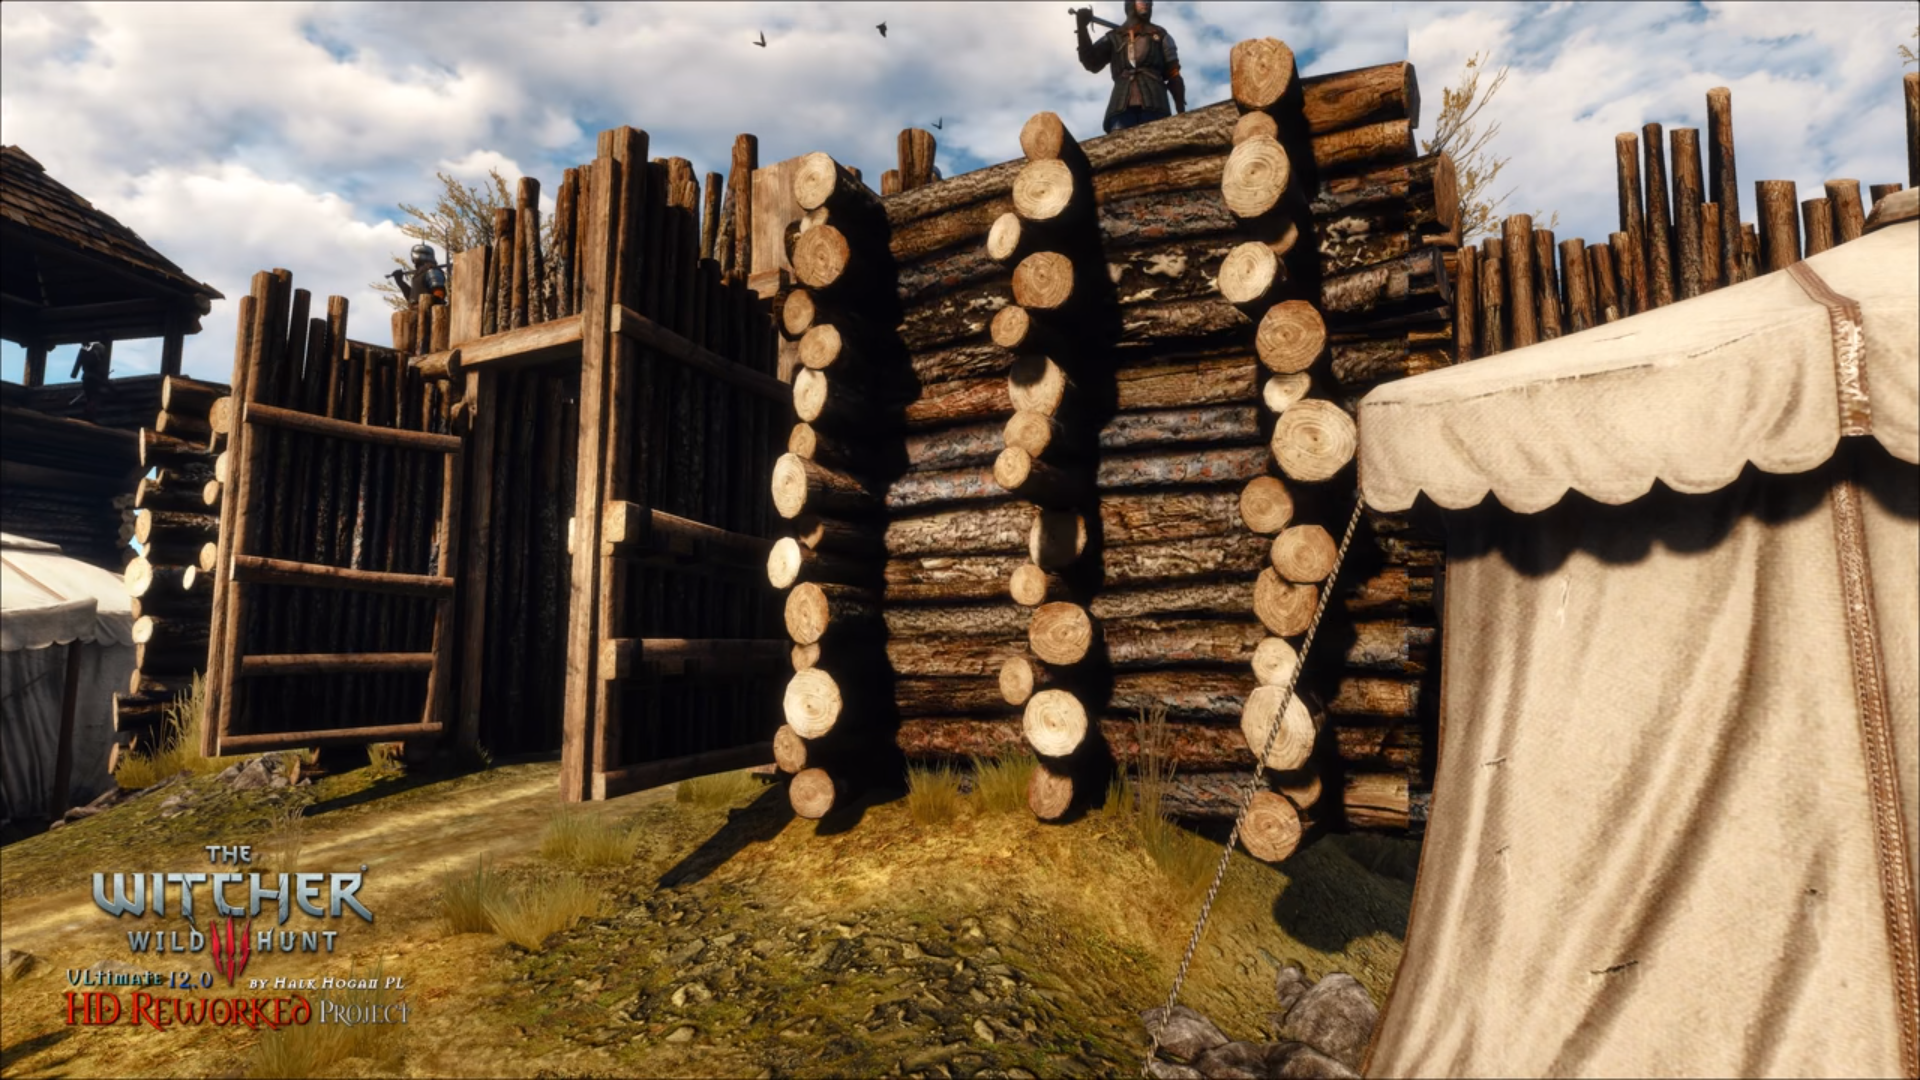 Image for You need to check out this amazing Witcher 3 mod